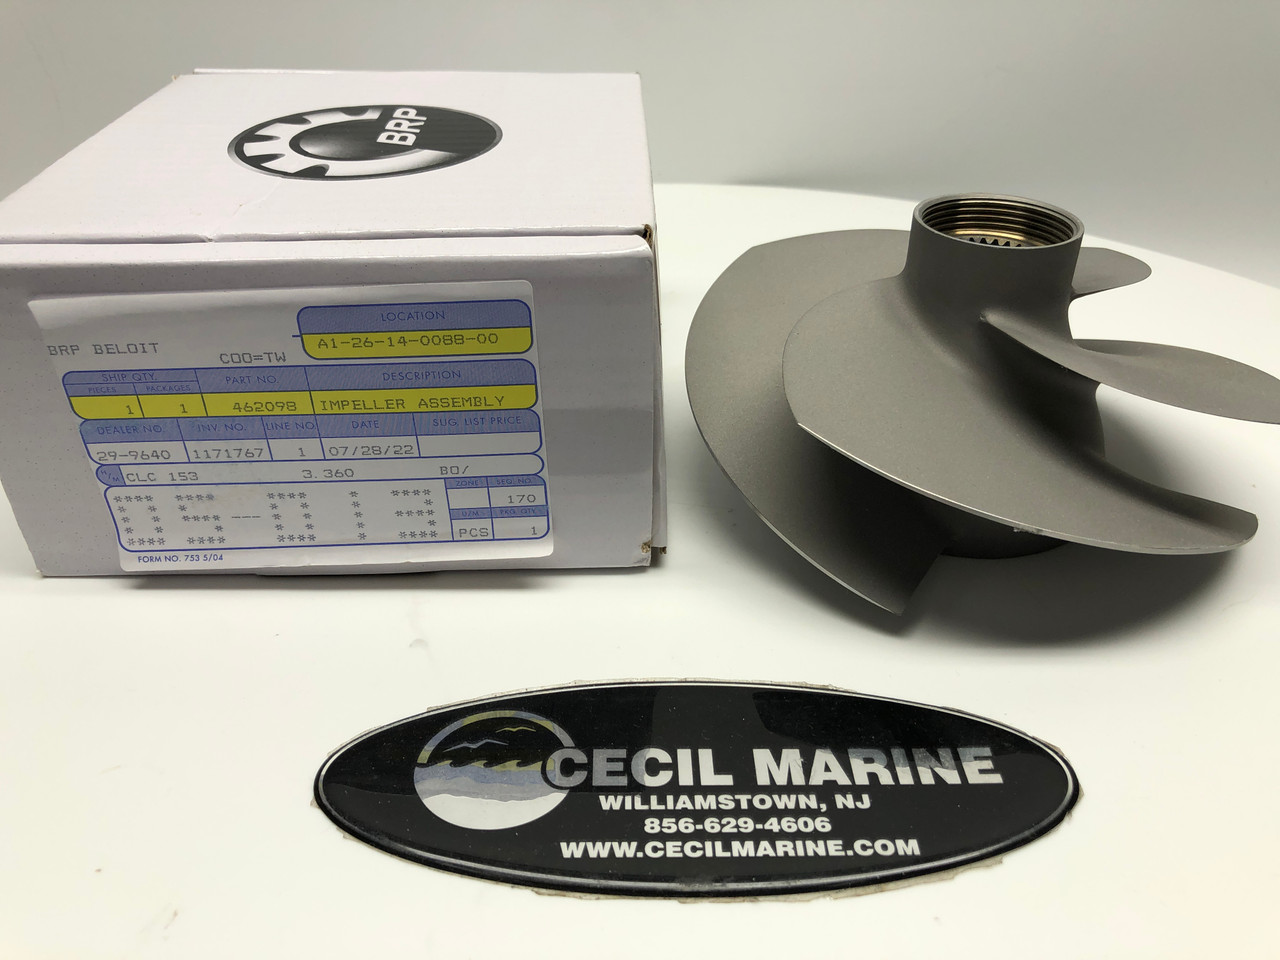 $399.99* GENUINE BRP no tax* IMPELLER STARBOARD ( DRIVER) 250 HP. 24 TO 25FT.  BOAT 0462098 (BRP's old part number was 0461162 ) *In Stock & Ready To Ship!